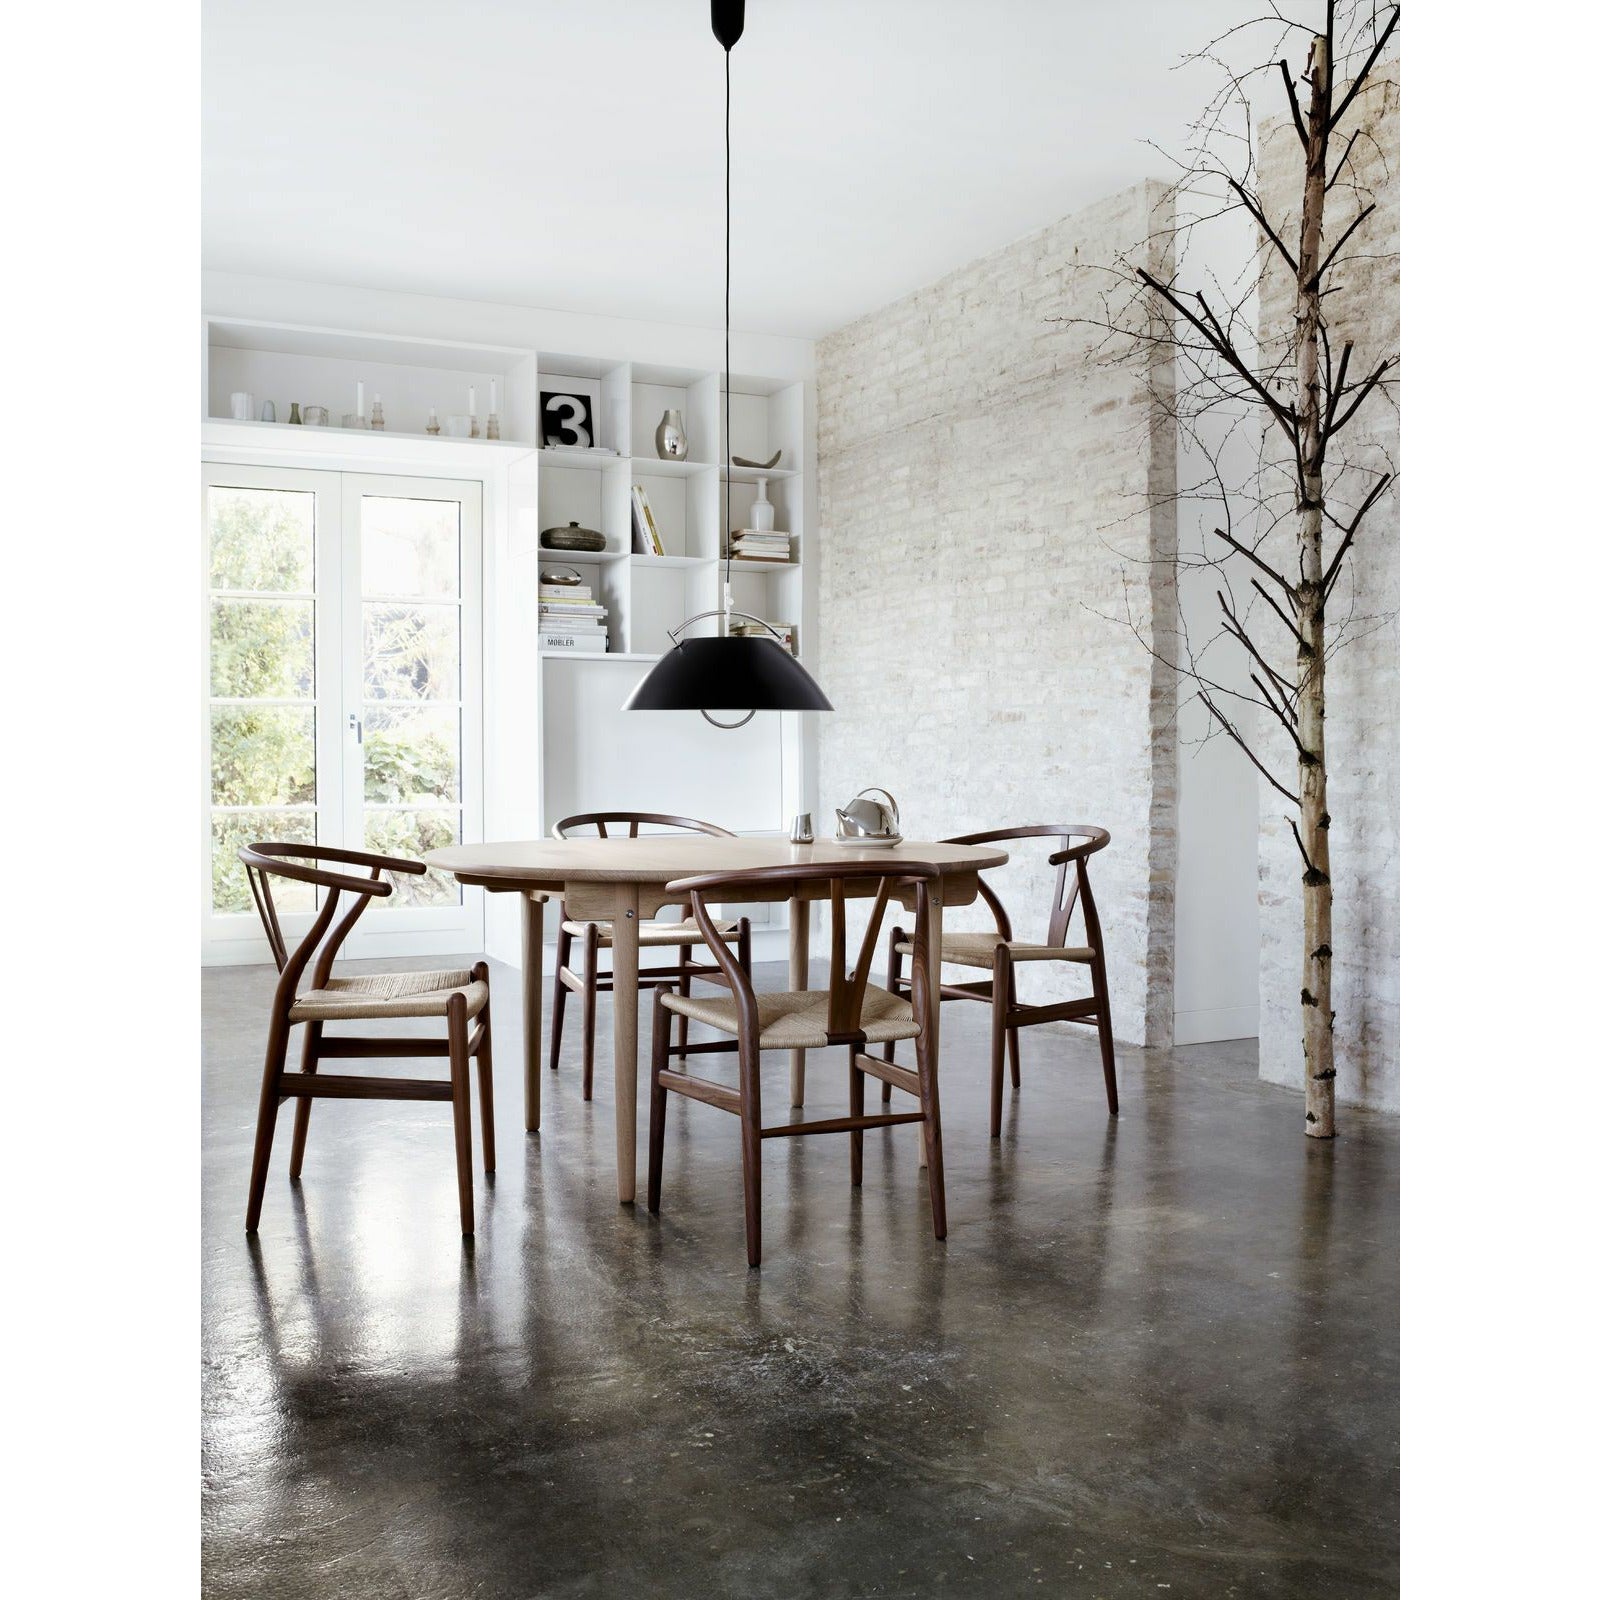 Carl Hansen Ch337 Dining Table Incl. 2 Additional Plates, White Oiled Oak